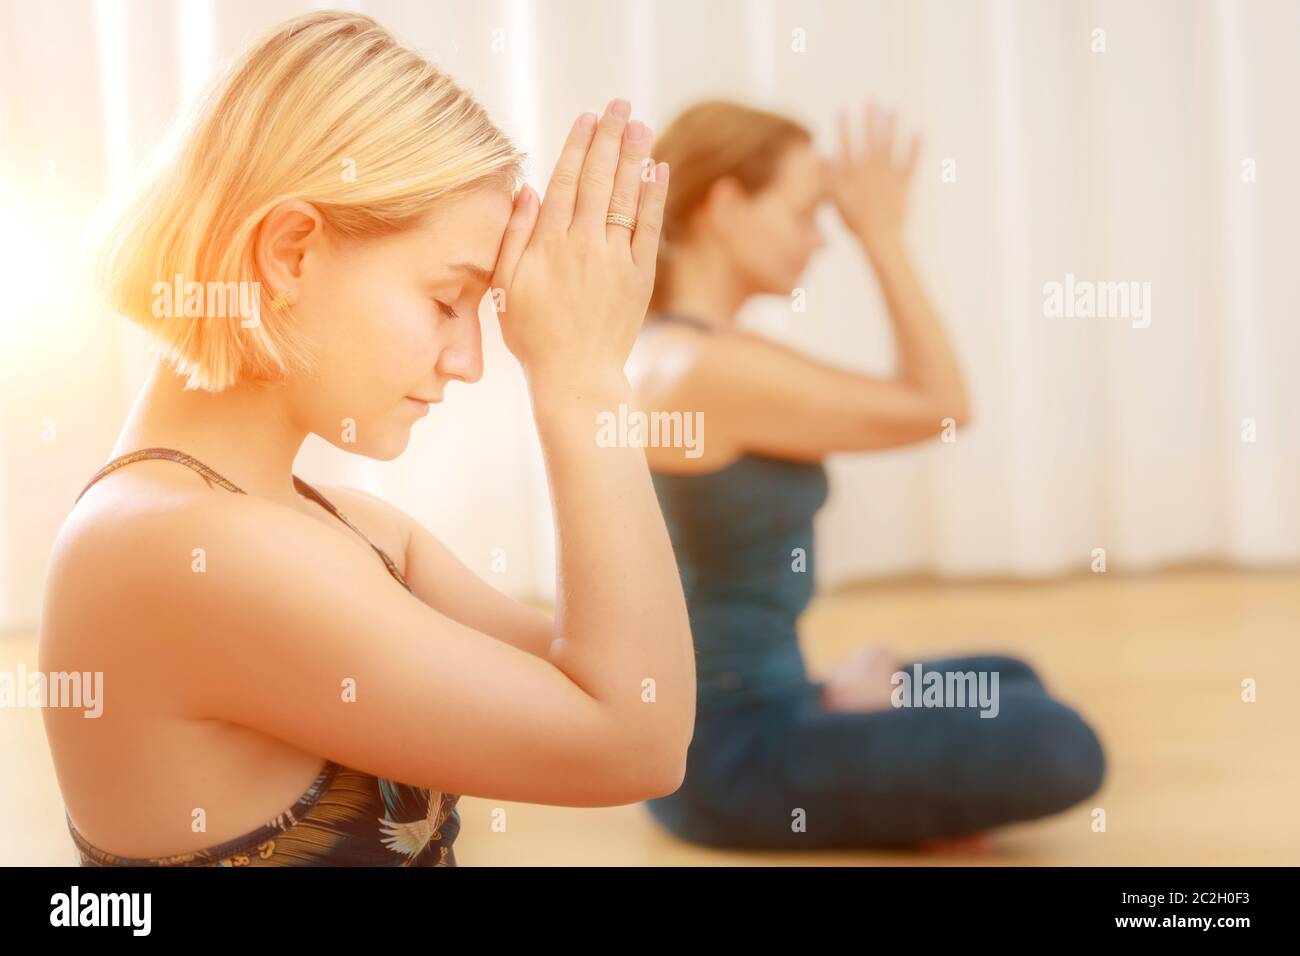 Yoga class hands on the forehead Stock Photo